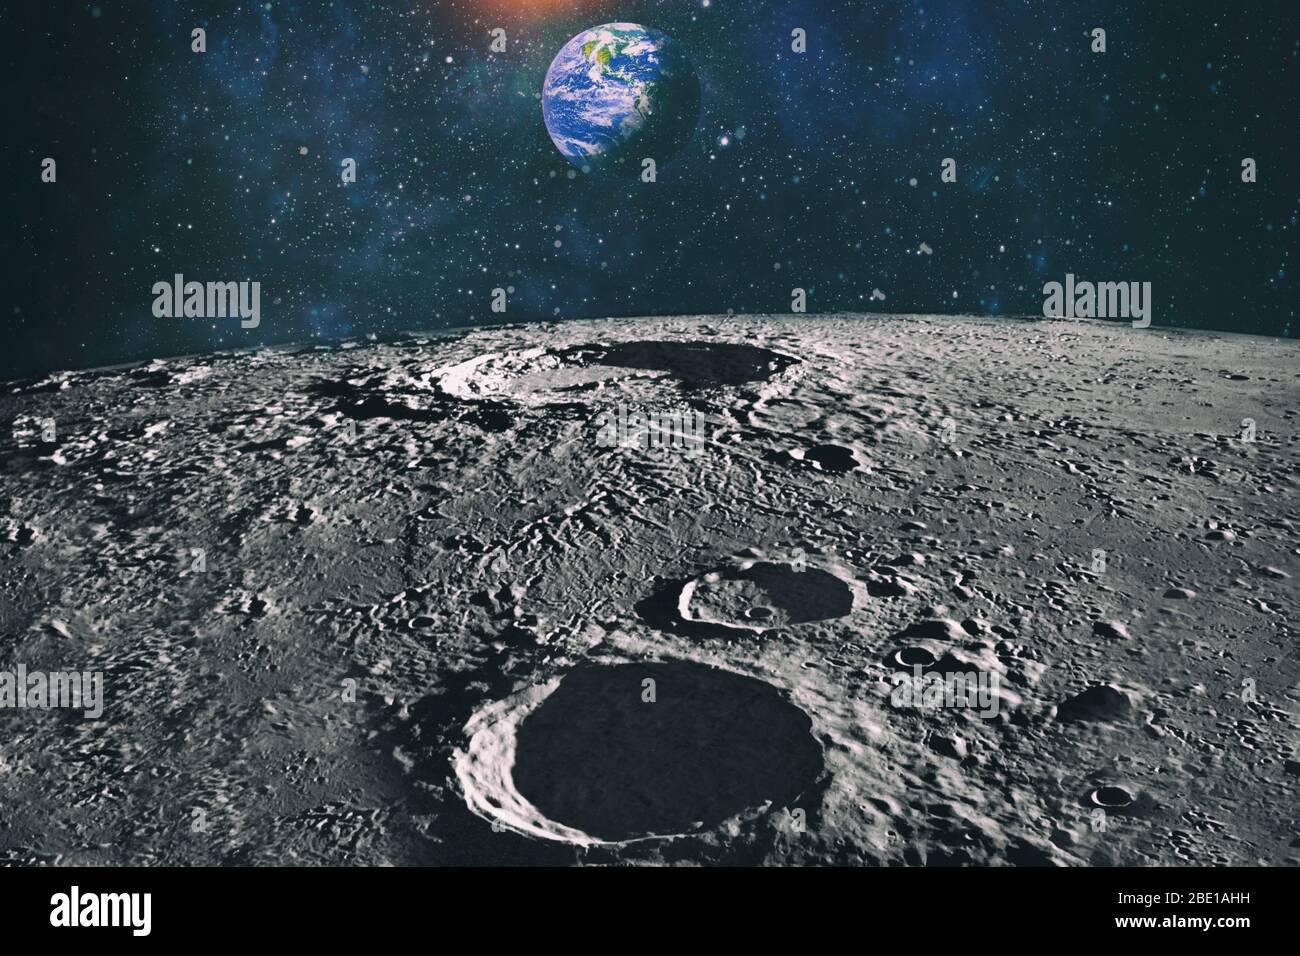 Footprints as an evidence of people being there or great forgery.The Earth as Seen from the Surface of the Moon - Elements of this Image Furnished by Stock Photo